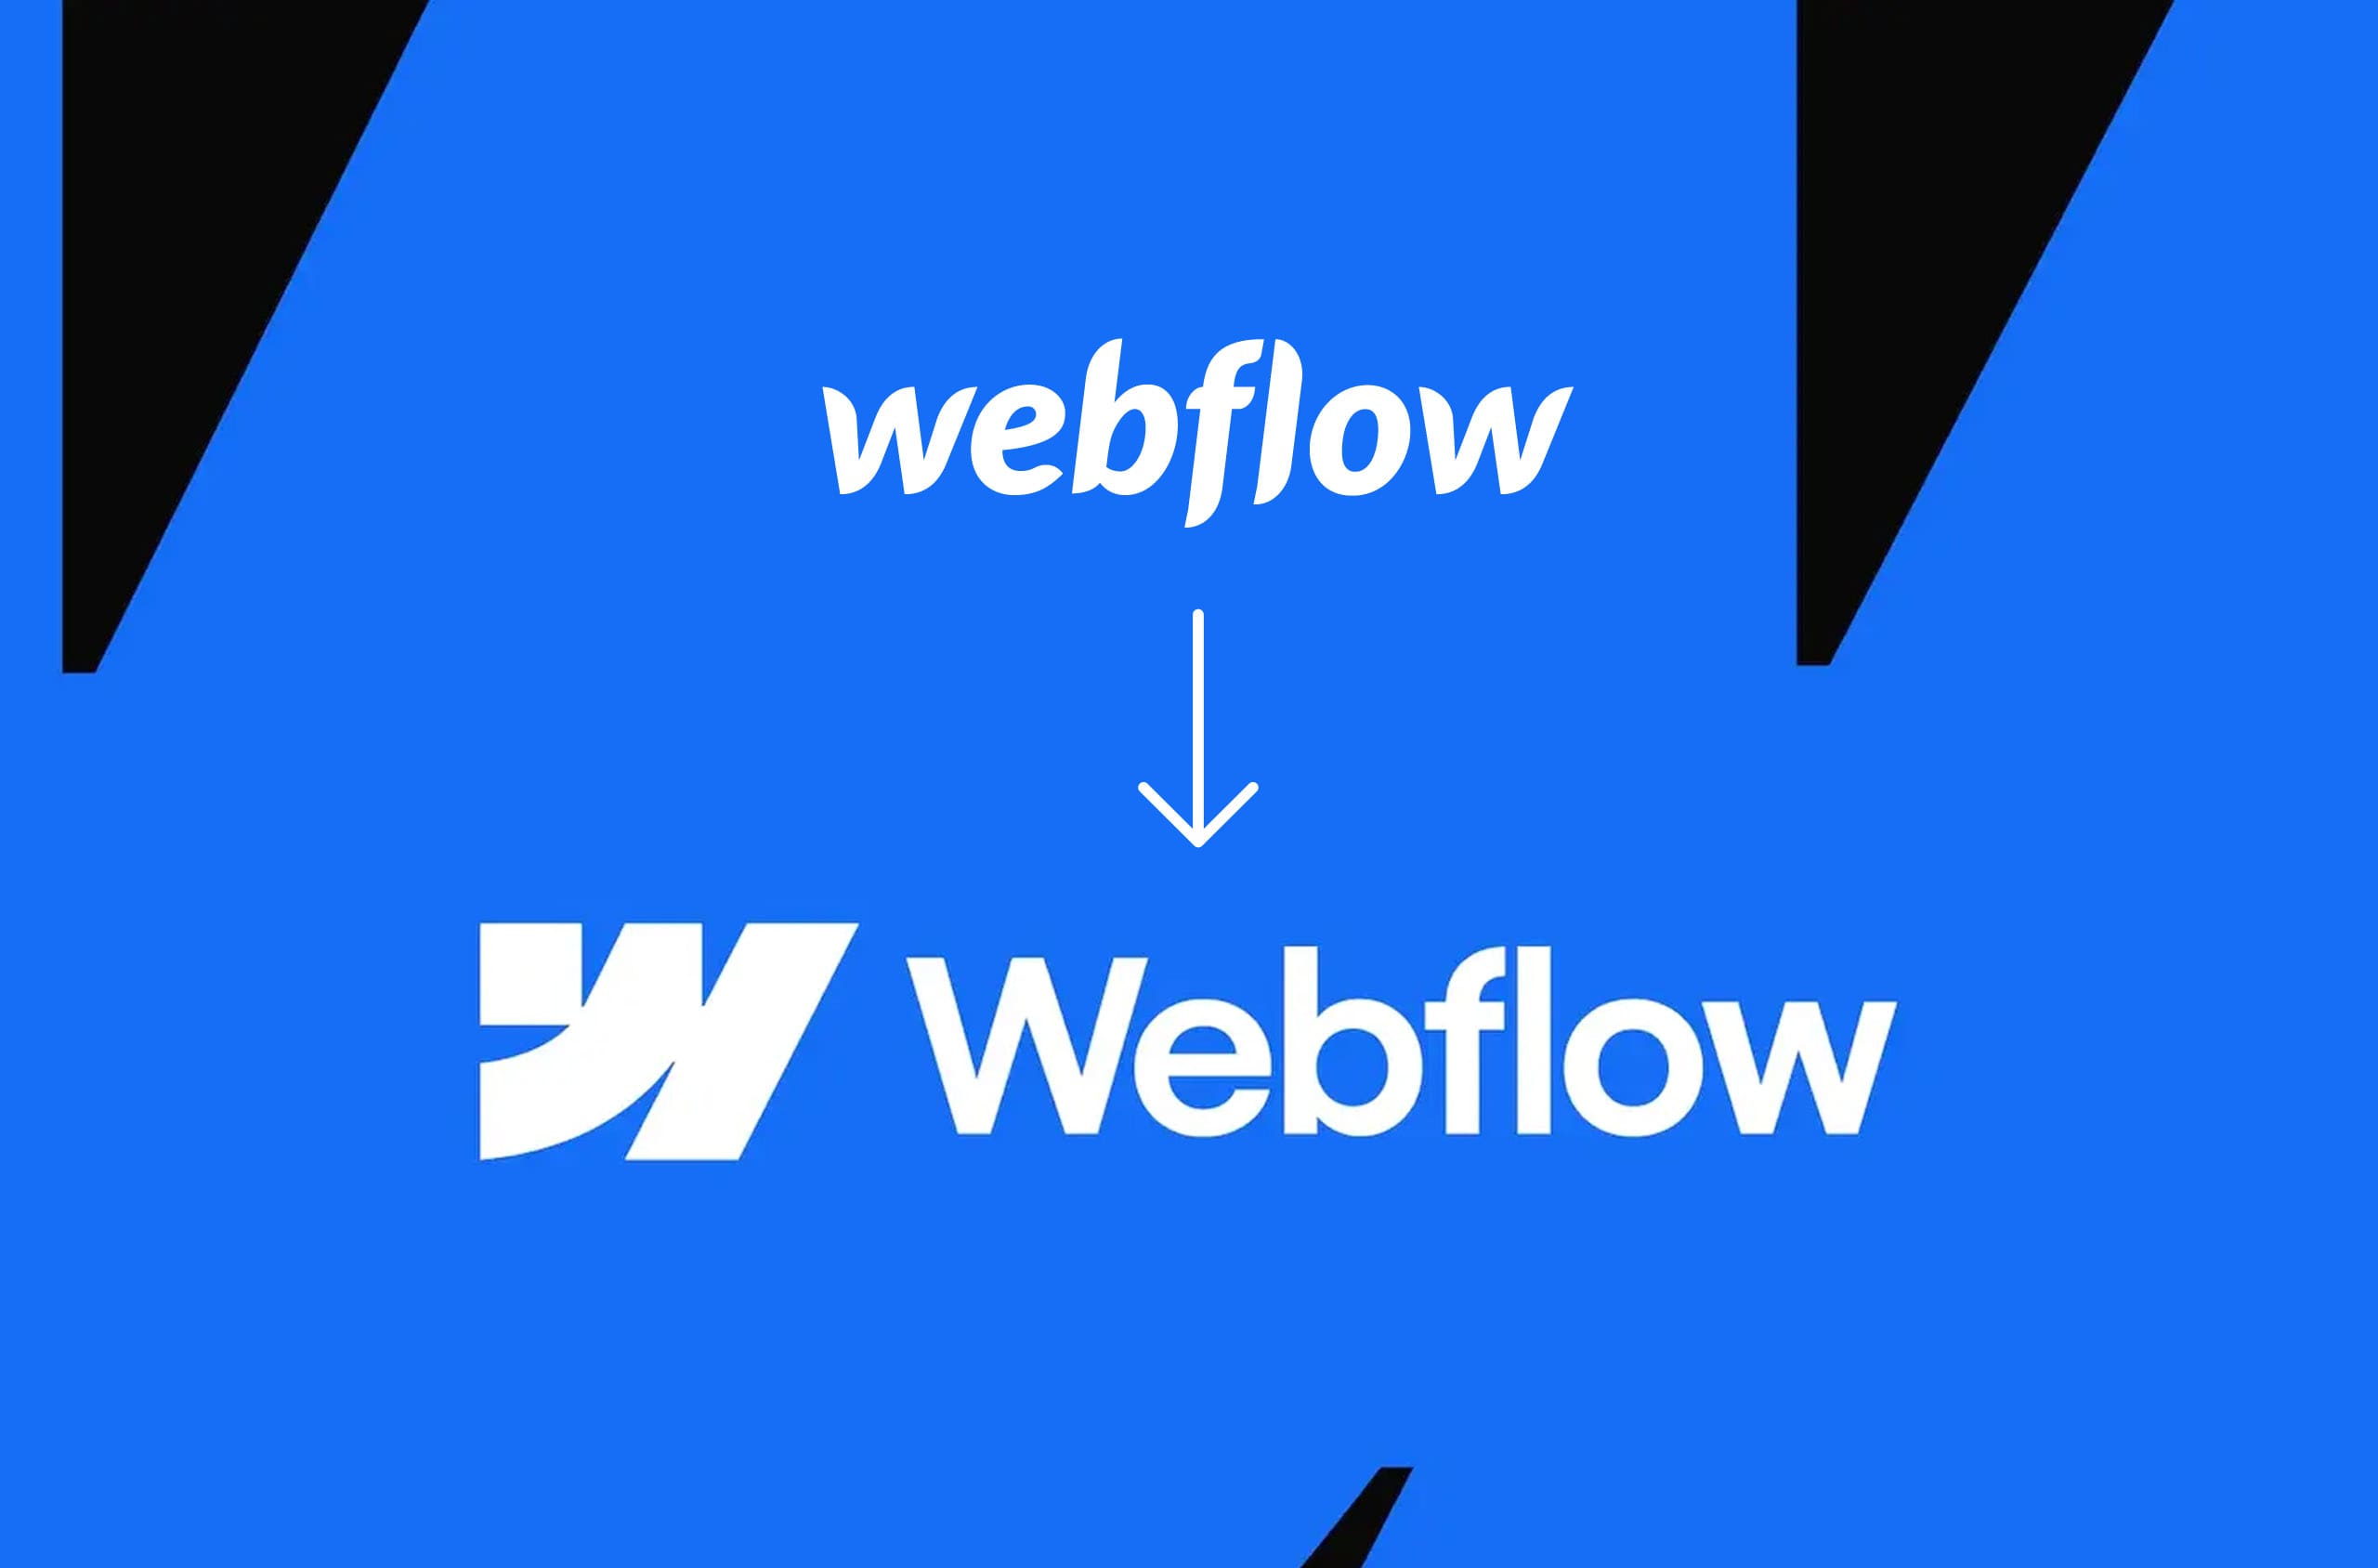 A blue graphic showcasing the webflow logo with a text transformation effect from plain text to stylised logo.